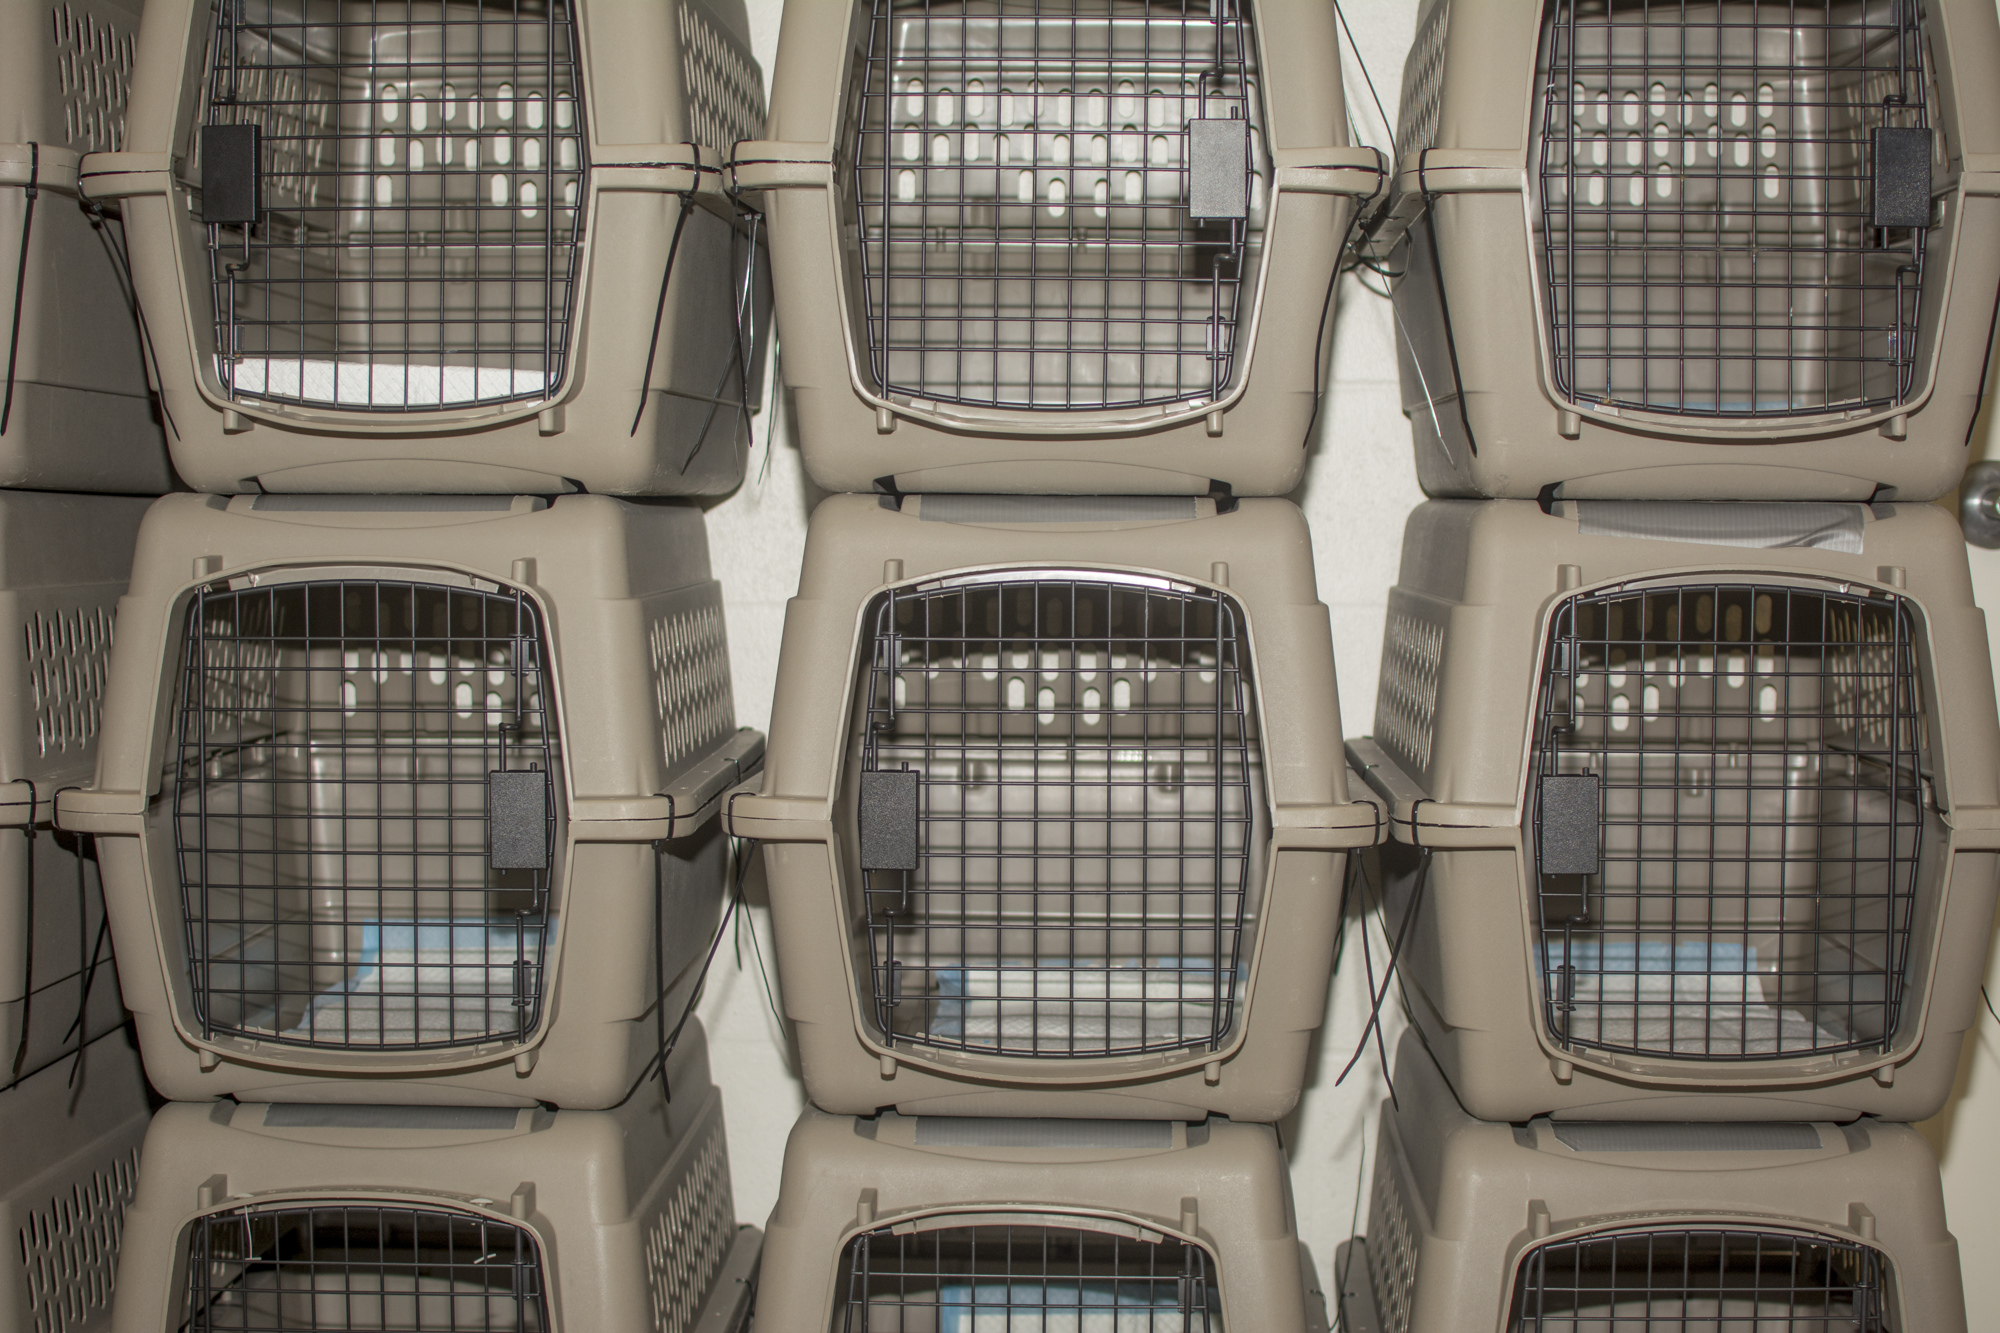 Cat Depot's hallways are lined with more than 100 pet carriers.